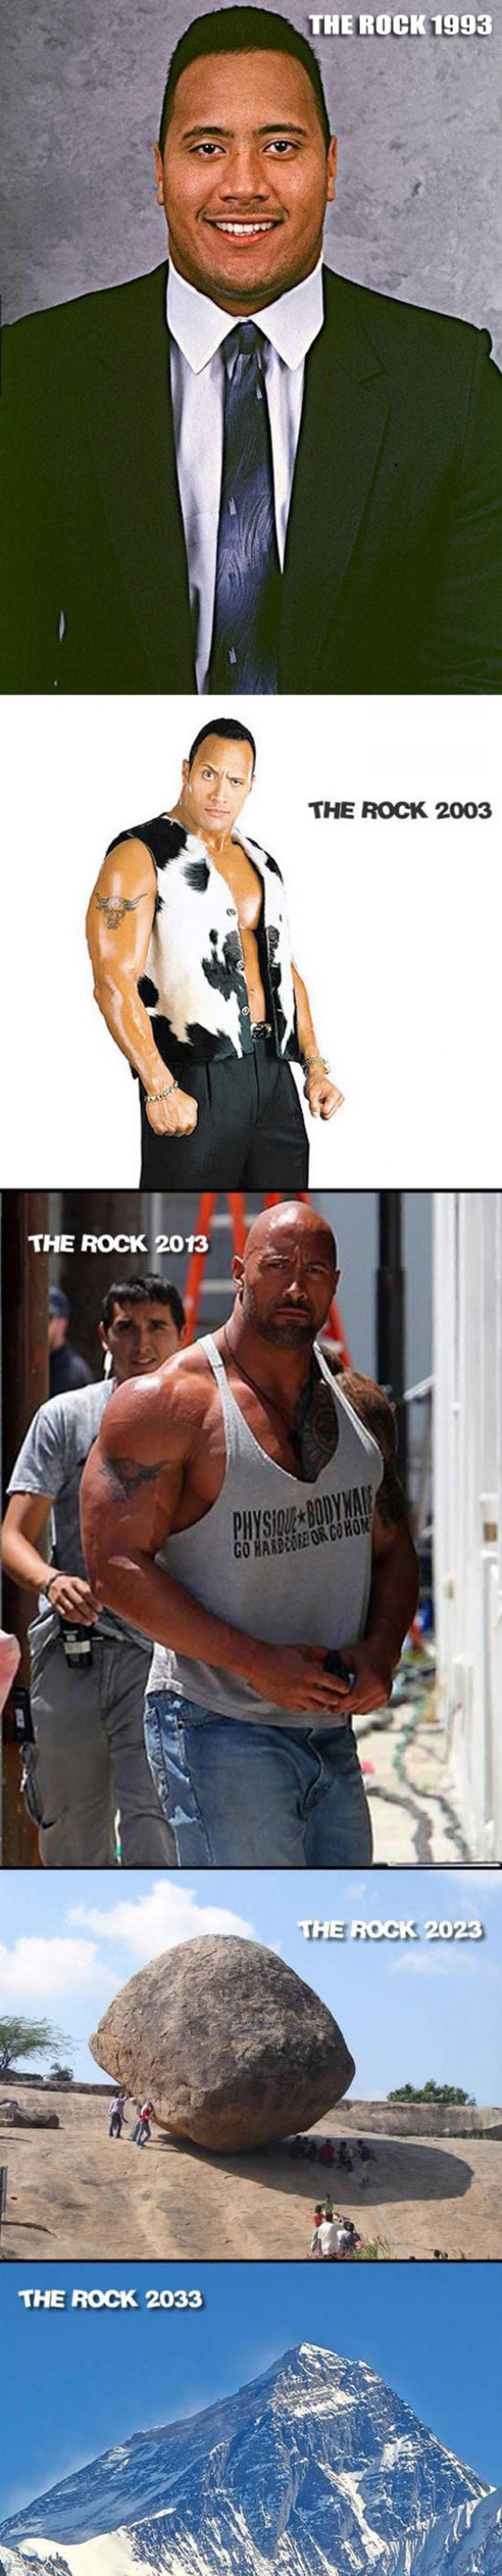 meme between the rock and a hard place dwayne johnson - The Rock 1993 The Rock 2003 The Rock 2013 PhysiqueBo Go Harpere Or Cohon The Rock 2023 The Rock 2033